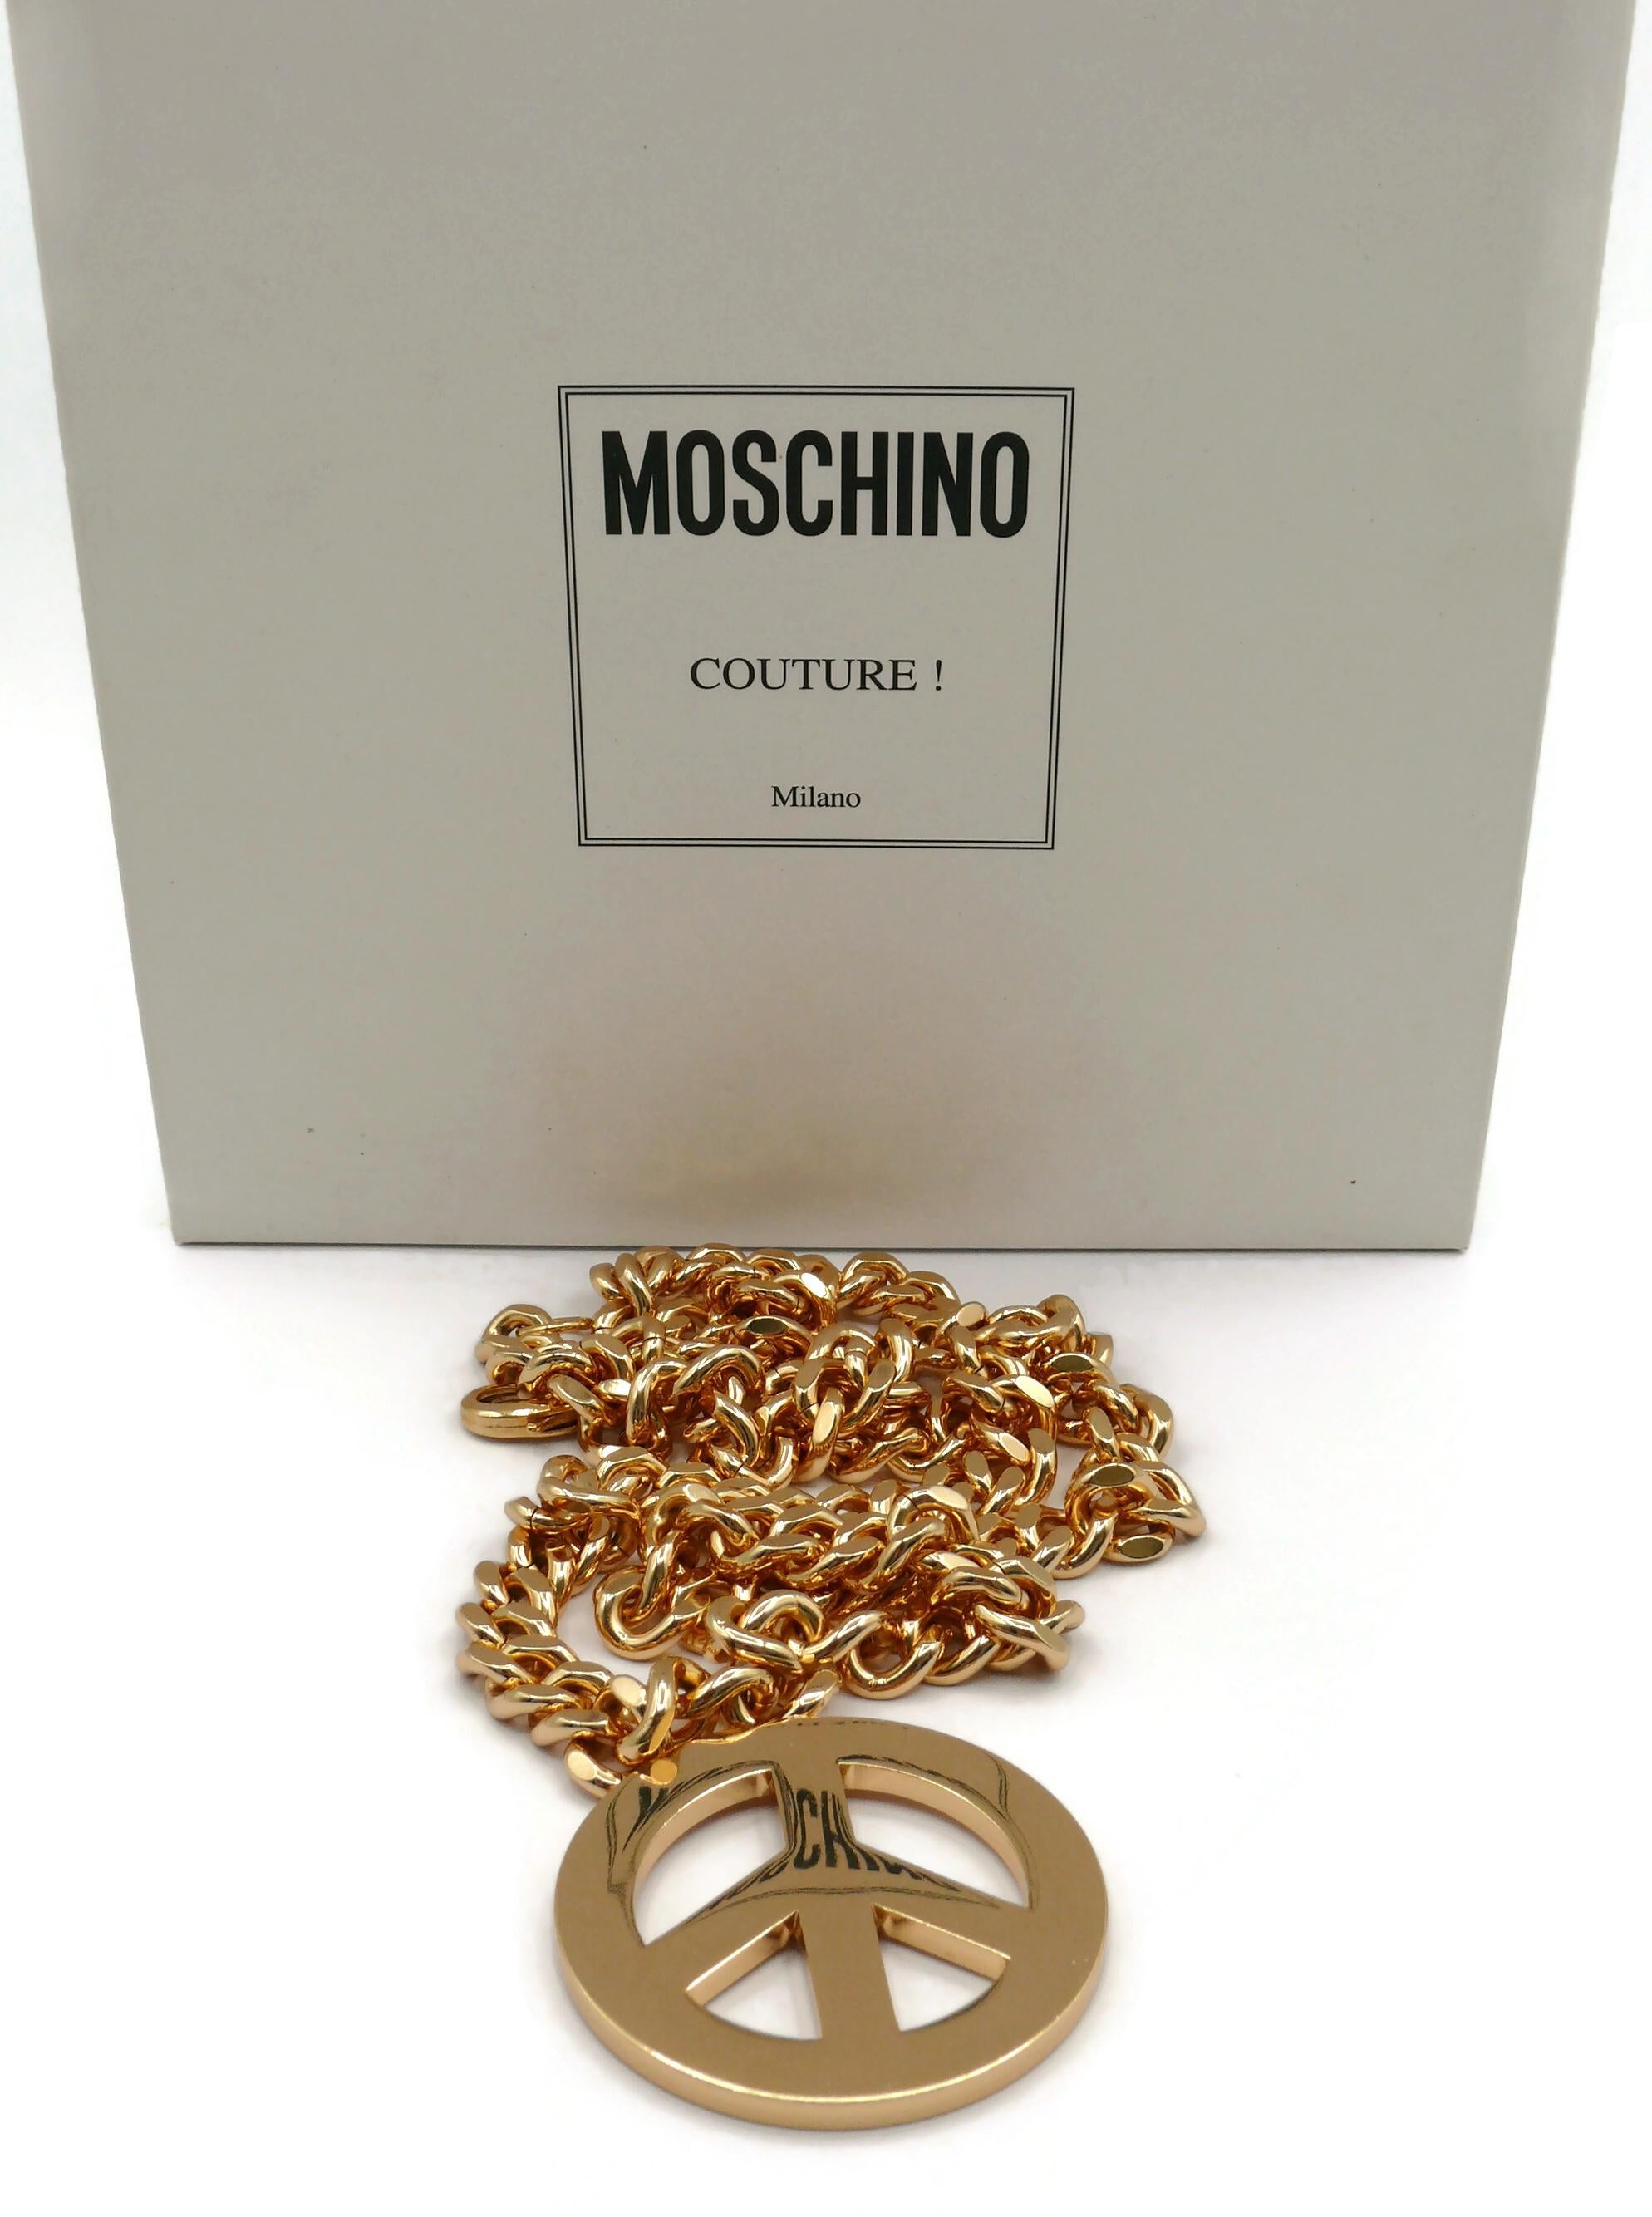 MOSCHINO by JEREMY SCOTT gold tone chain necklace featuring a peace sign symbol pendant.

Autumn/Winter 2014 Collection.

Lobster clasp closure.

Embossed MOSCHINO Made in Italy.

Has weight on it (387 grams) !

Indicative measurement : length